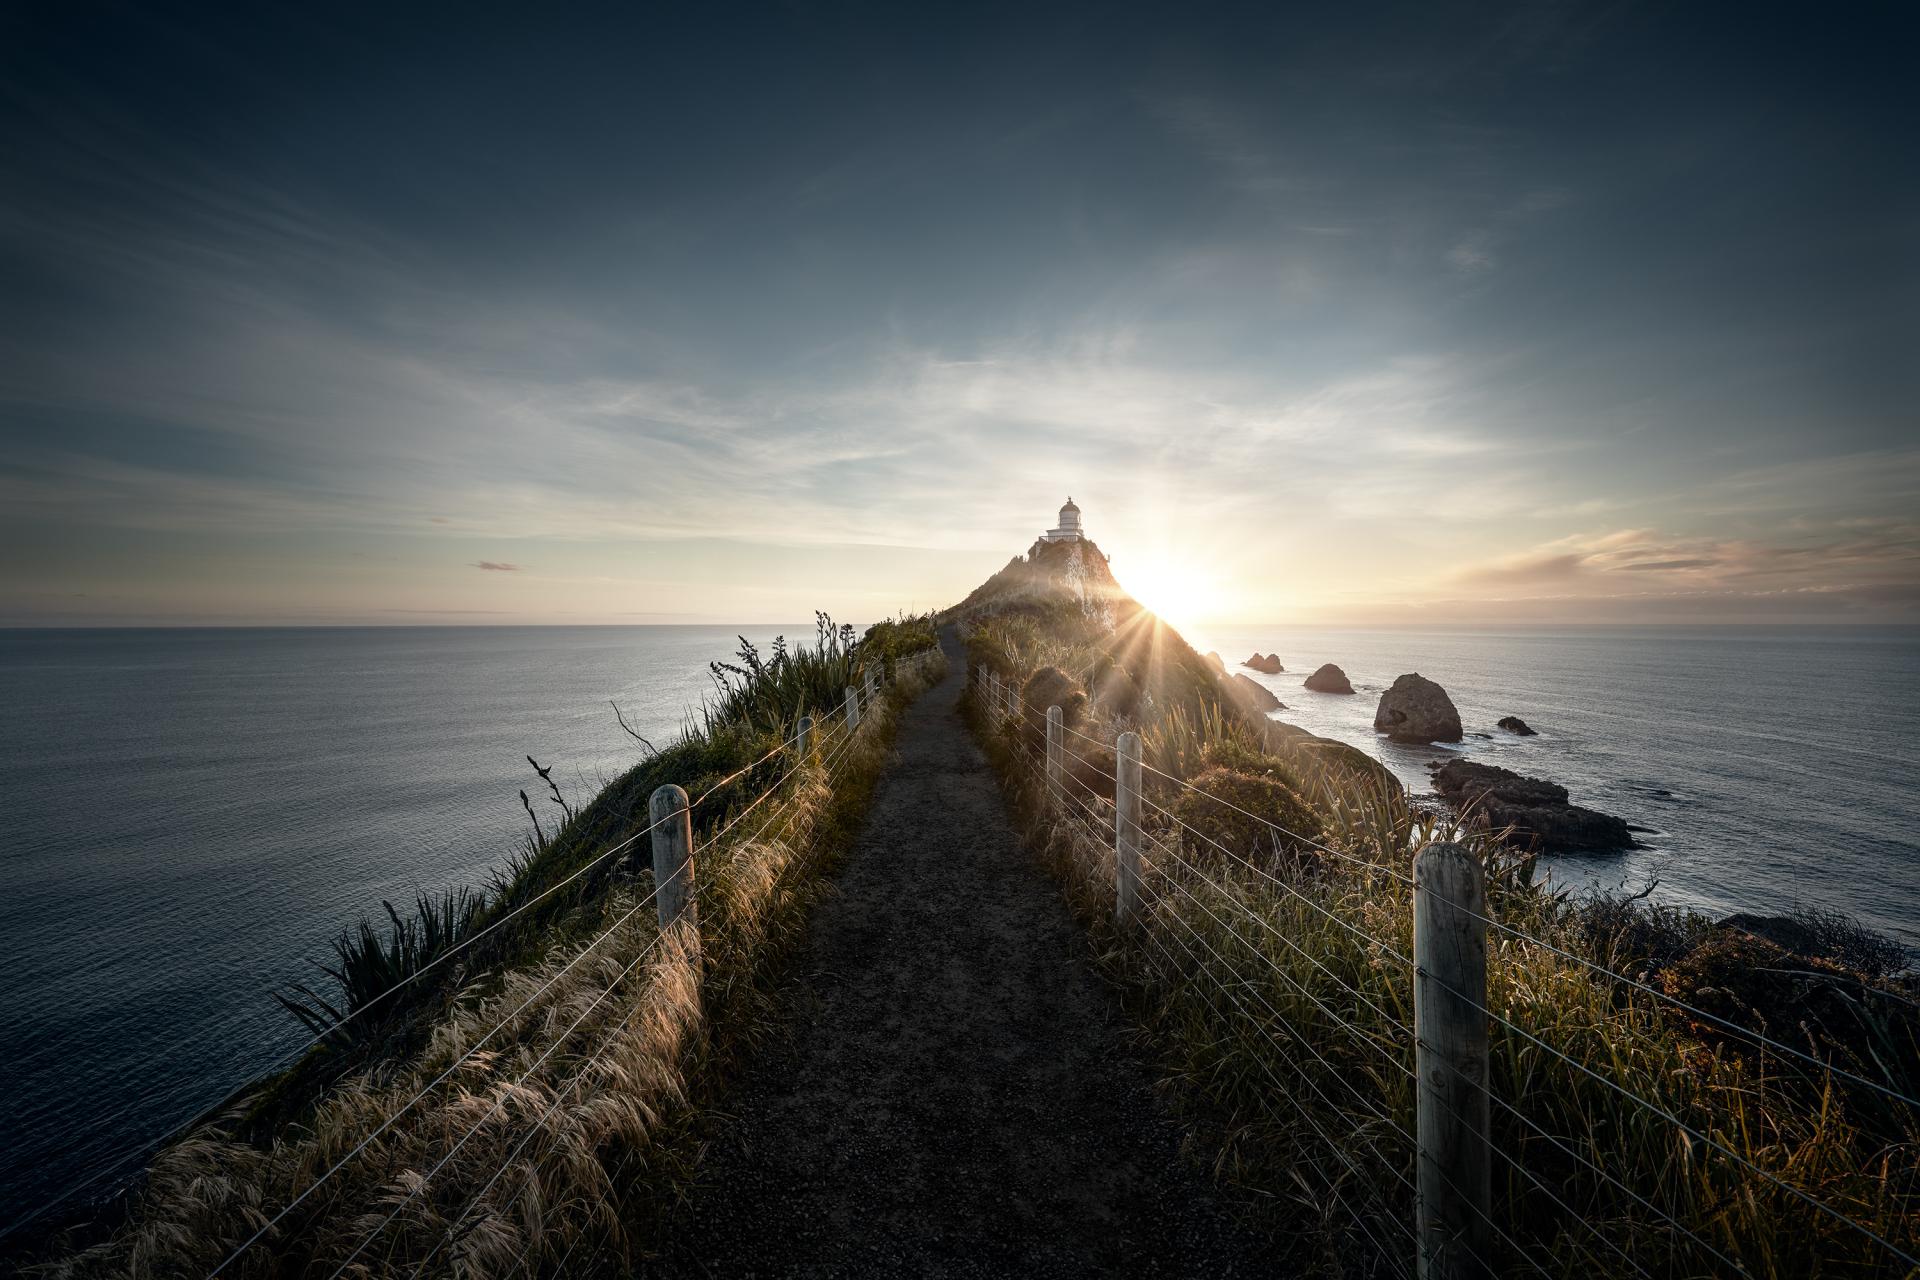 London Photography Awards Winner - Nugget Point